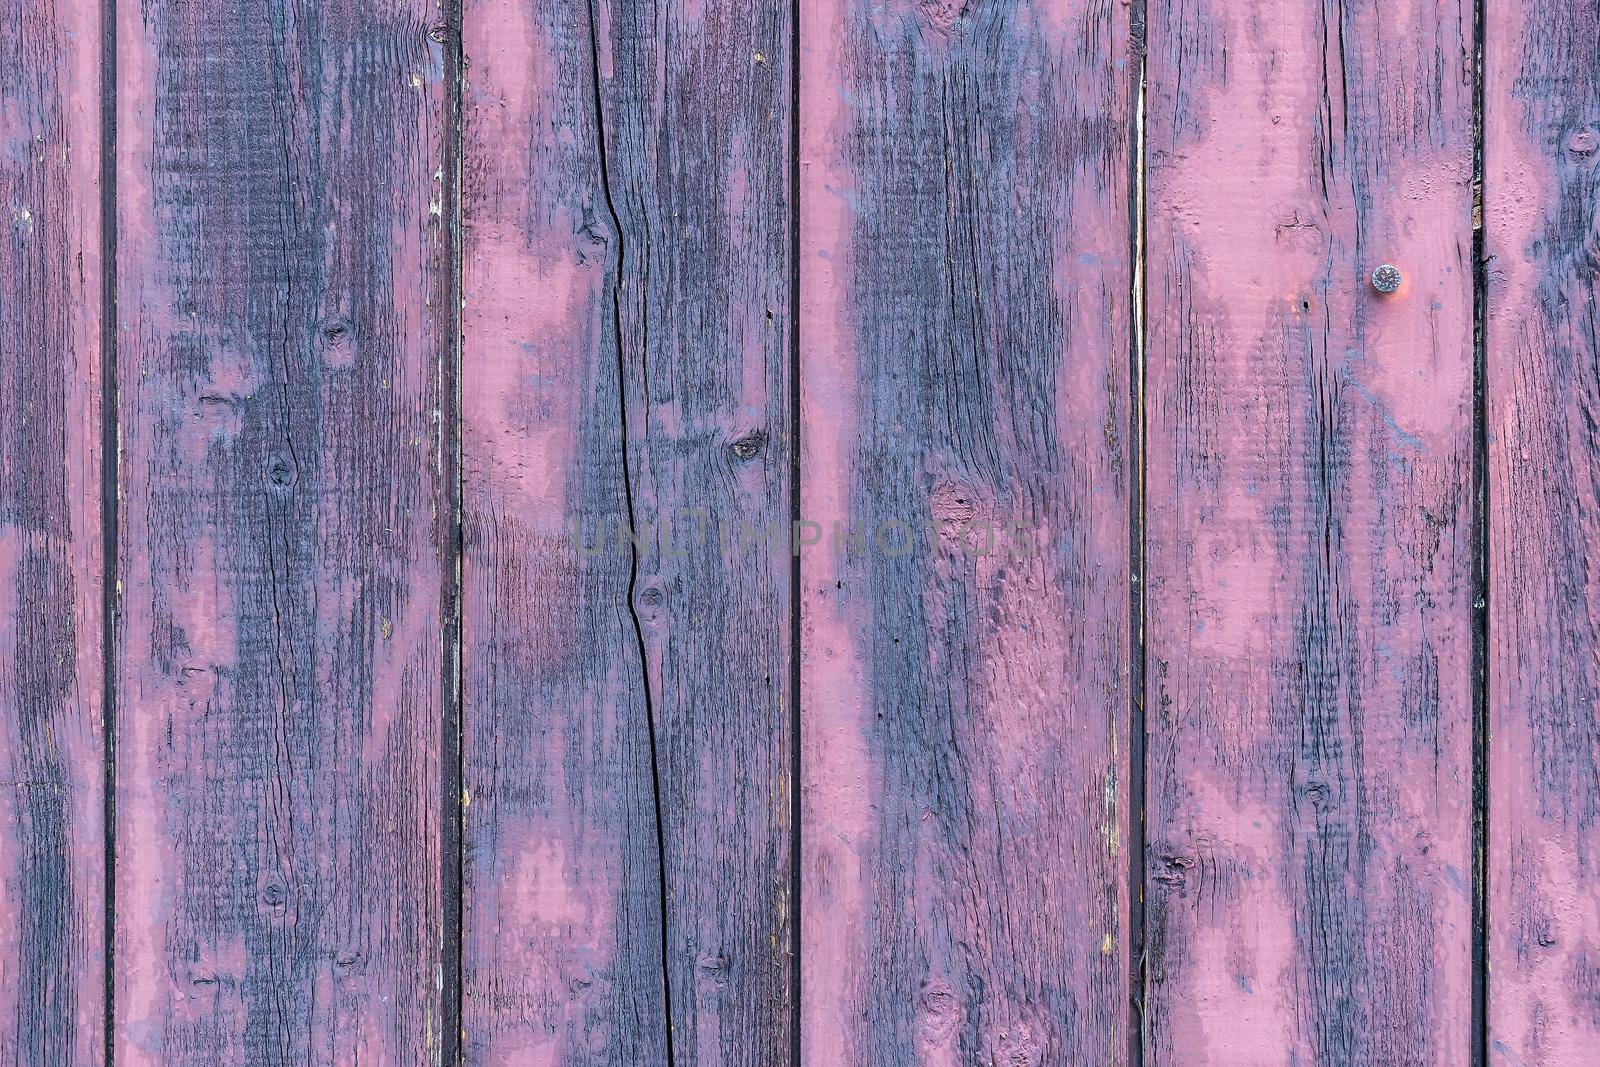 An area of shabby, old planks vertically oriented Texture, background for further work.